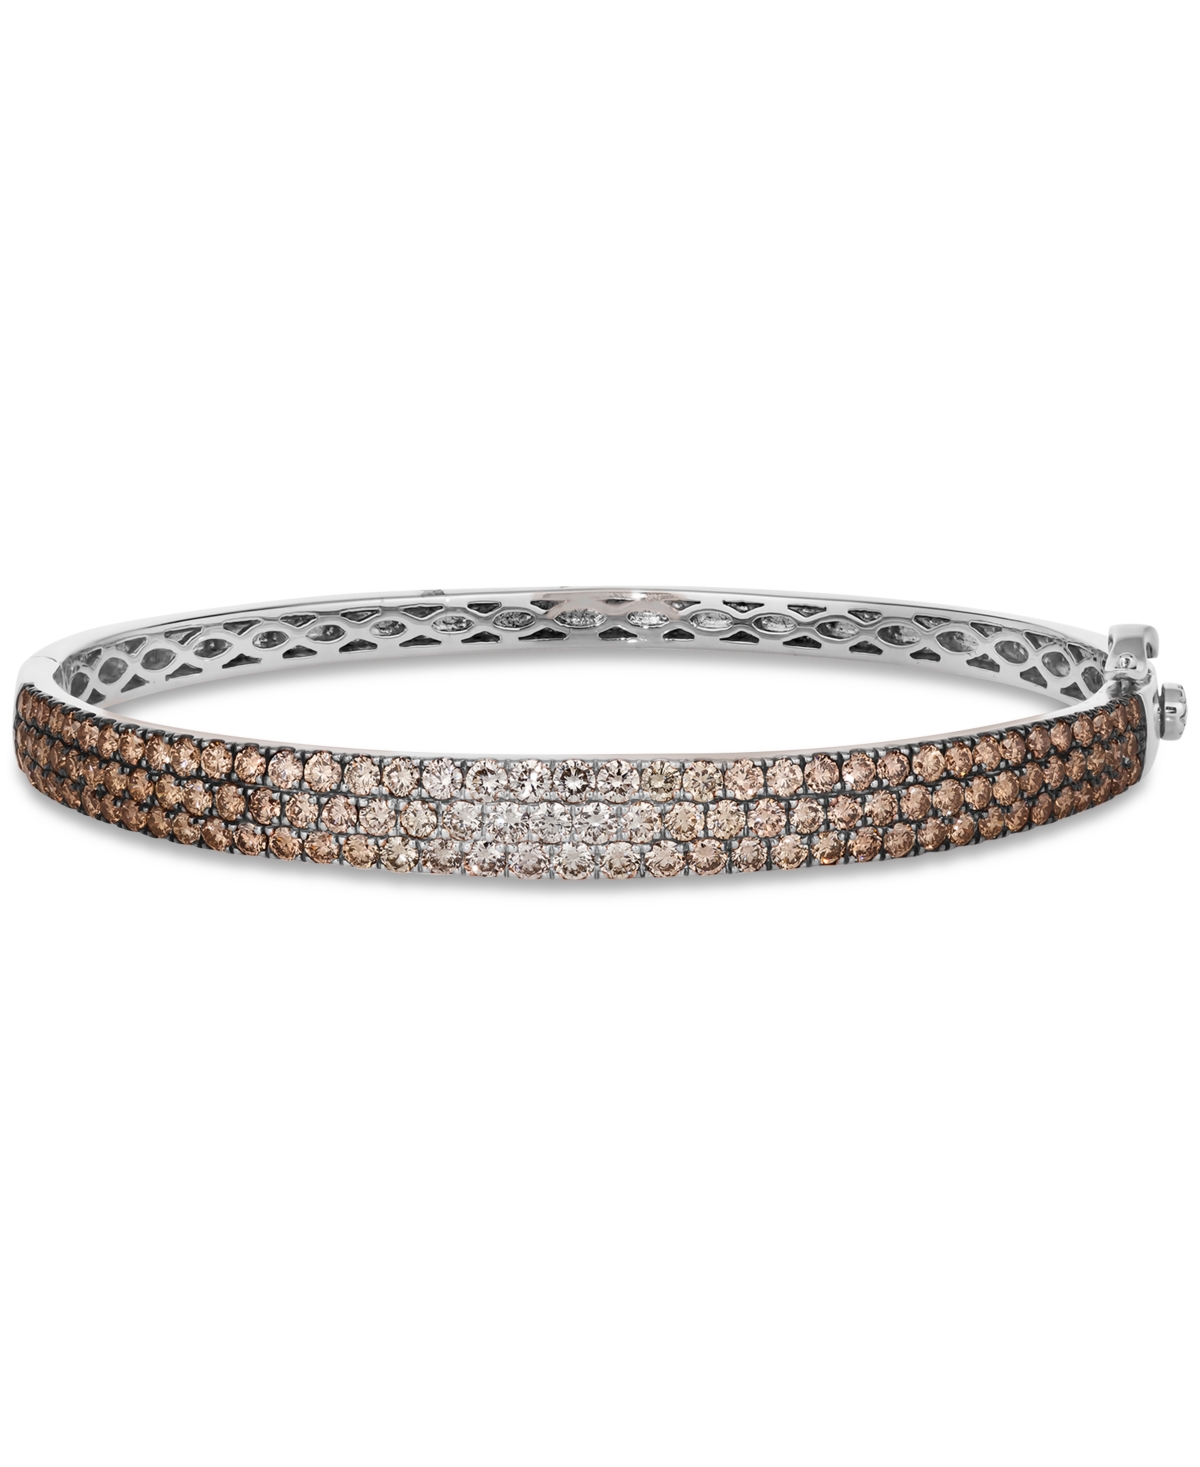 Ombre Chocolate Ombre Diamond & Nude Diamond Pave Bangle Bracelet (3-1/2 ct. t.w.) in 14k Rose Gold (Also Available in White Gold or Yellow Go